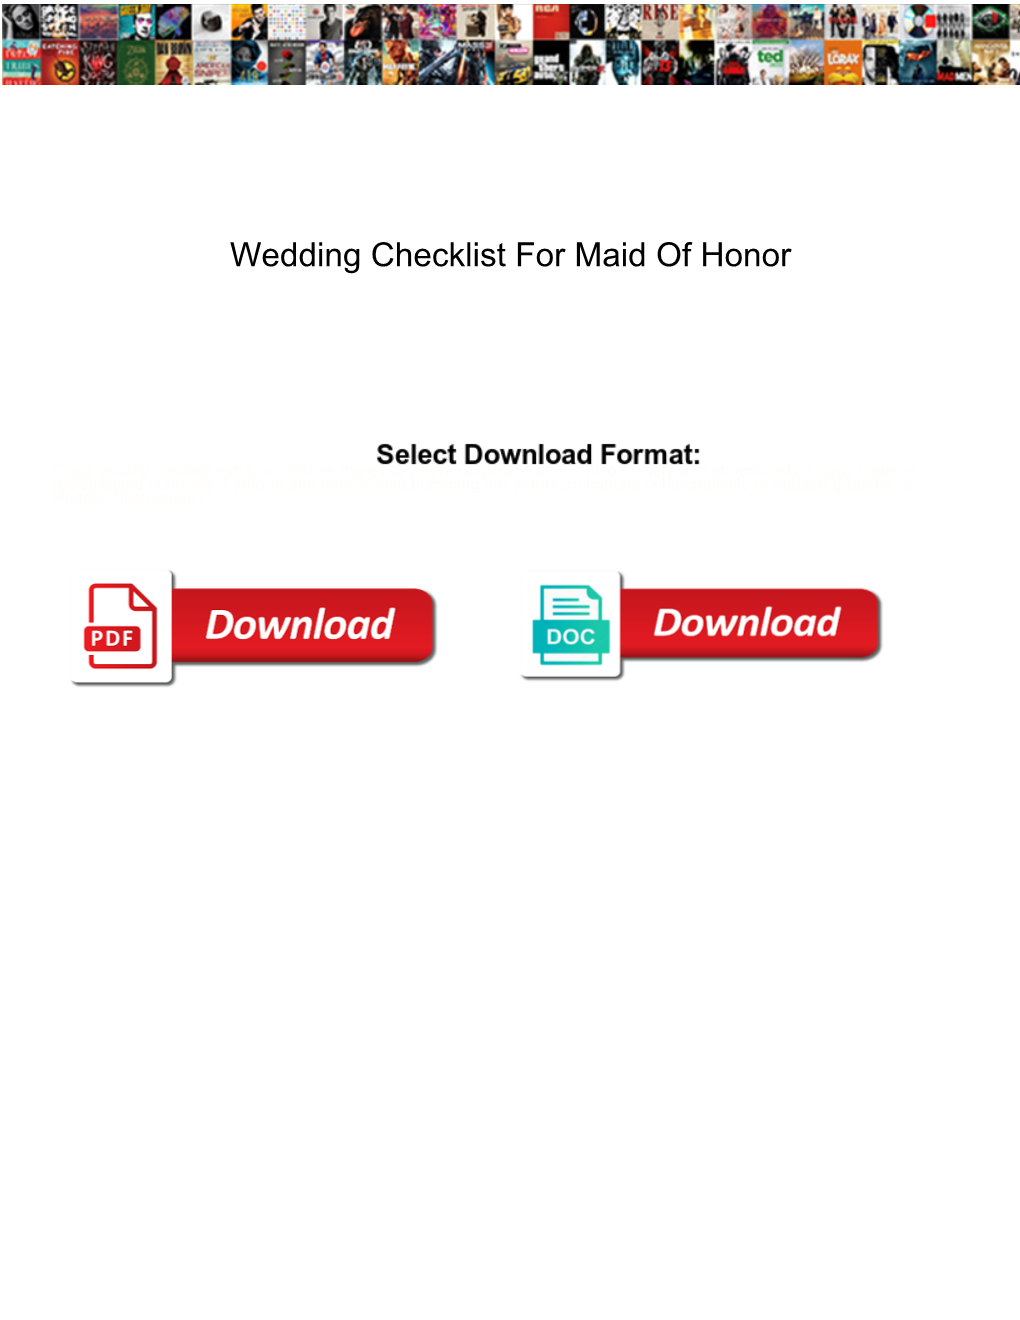 Wedding Checklist for Maid of Honor